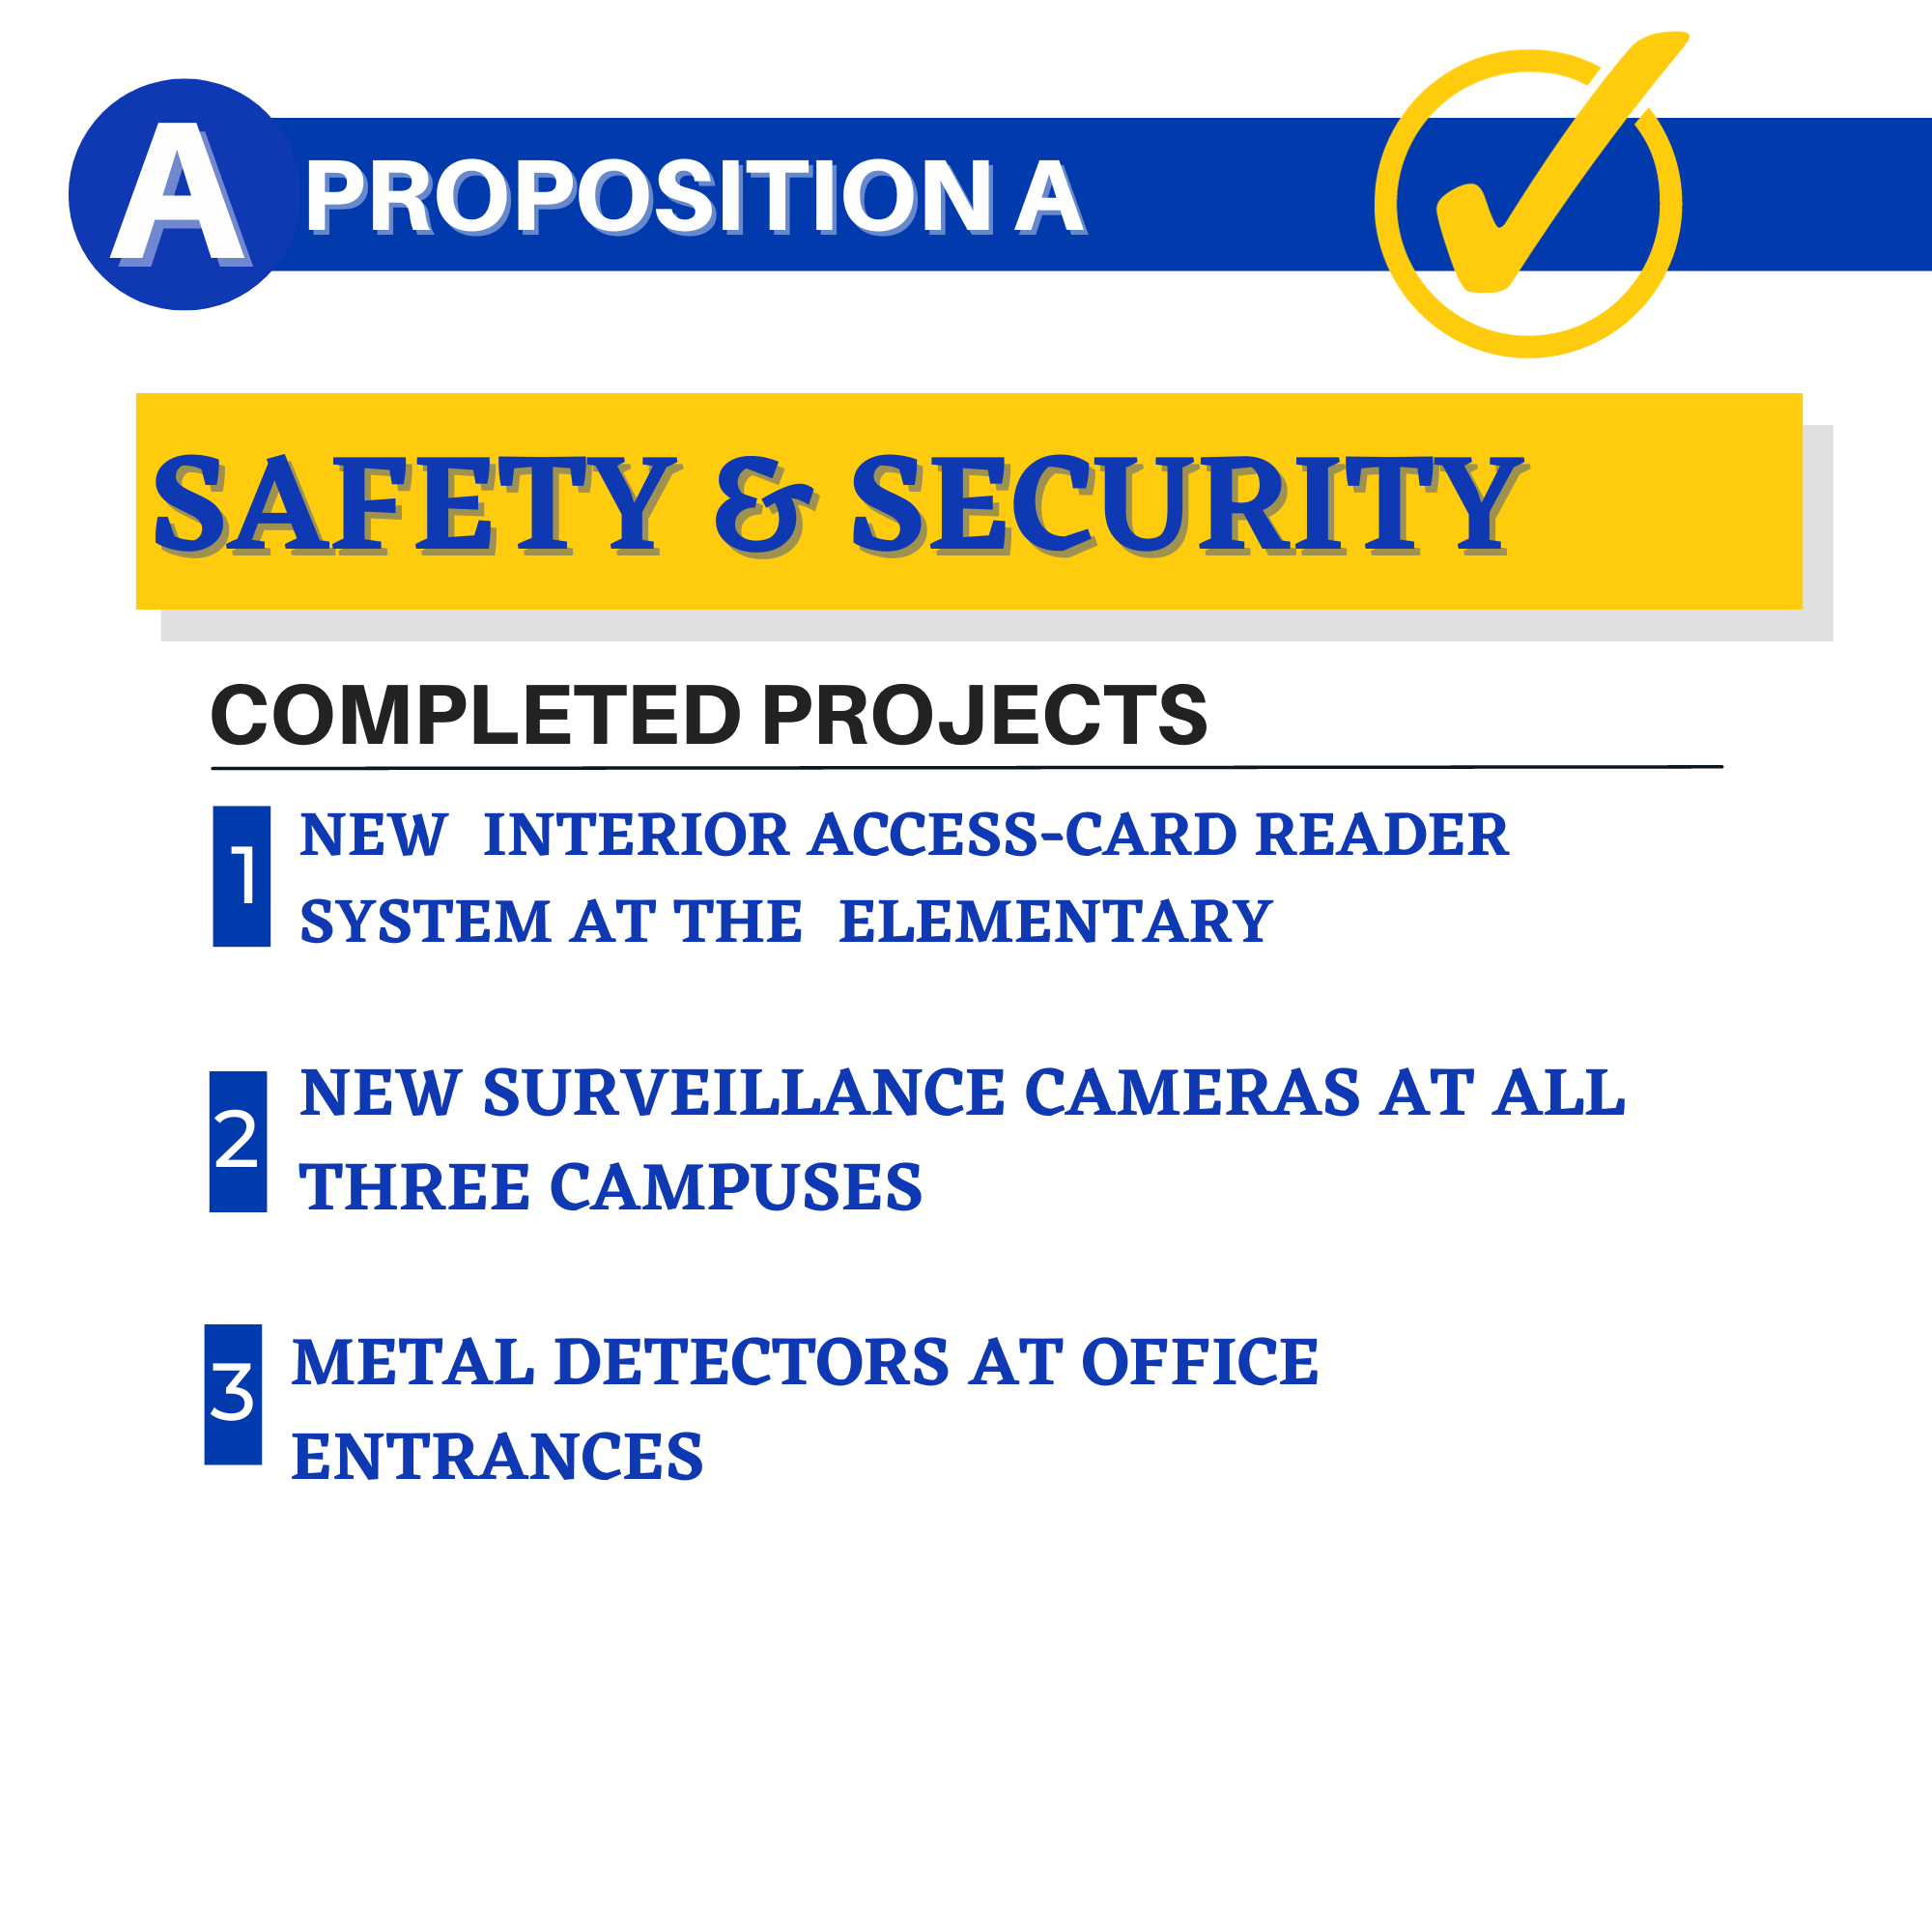 proposition a, SAFETY & sECURITY, cOMPLETED pROJECTS, NEW  INTERIOR ACCESS-CARD READER SYSTEM AT THE  ELEMENTARY, NEW SURVEILLANCE CAMERAS AT ALL THREE CAMPUSES, METAL DETERCTORS AT OFFICE ENTRANCES